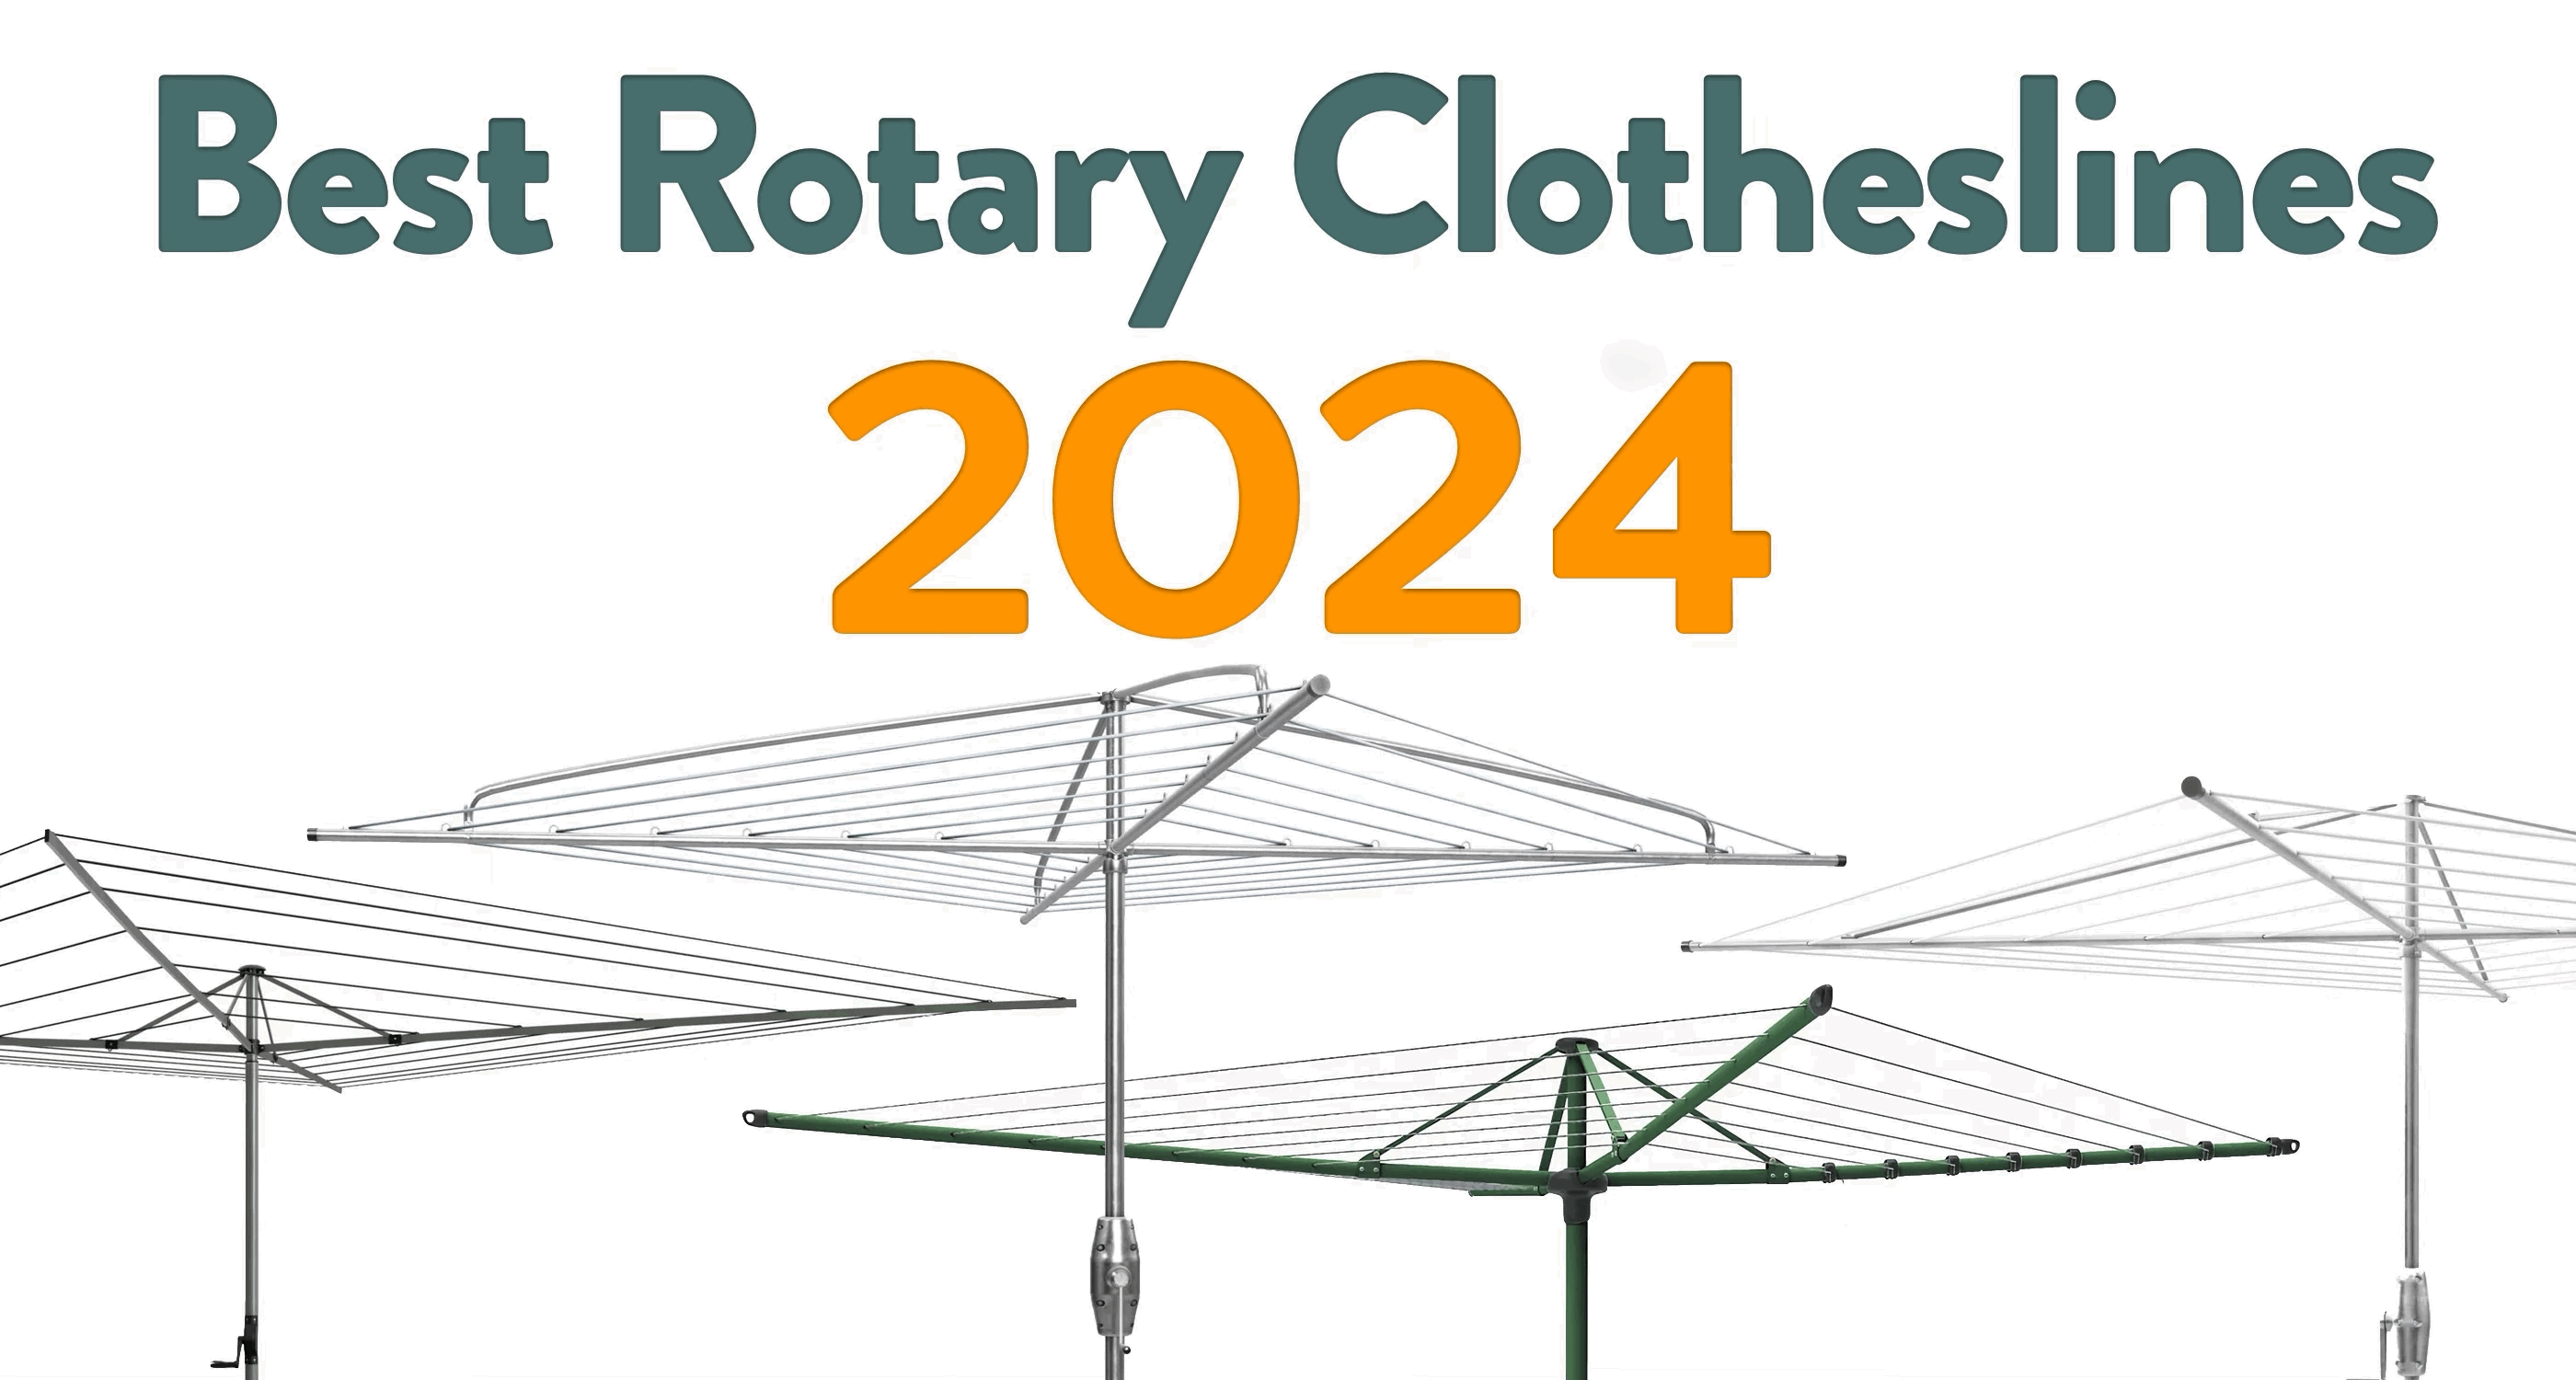 Best Rotary Washing Lines in 2024 thumbnail